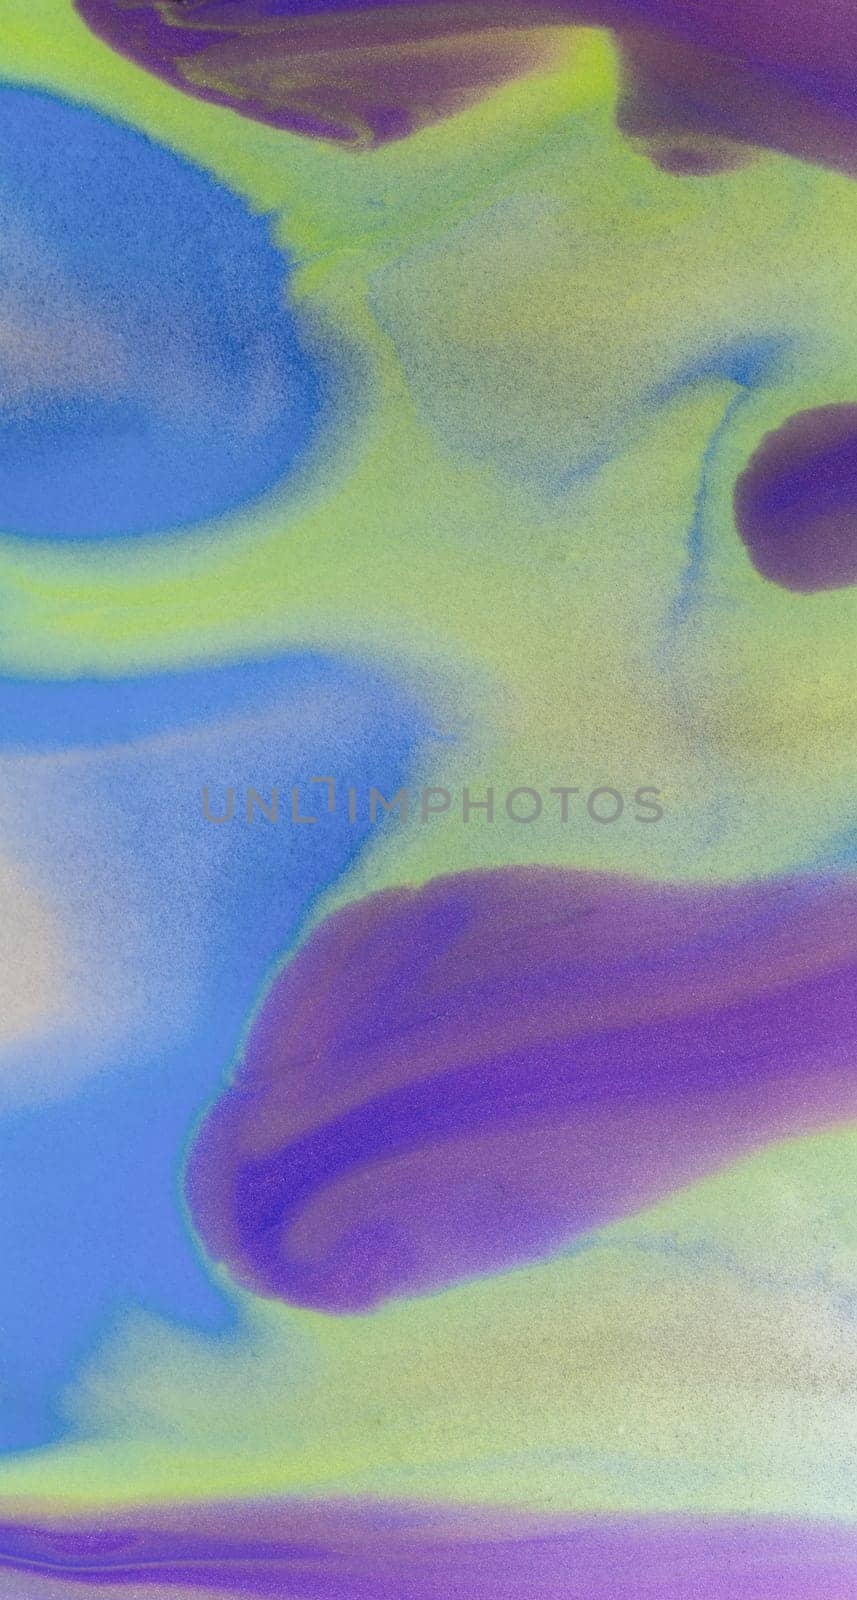 Abstract pastel marbled background with swirls in blue, yellow, and pink hues. Luxury liquid wave of grunge material, elegant wallpaper design.